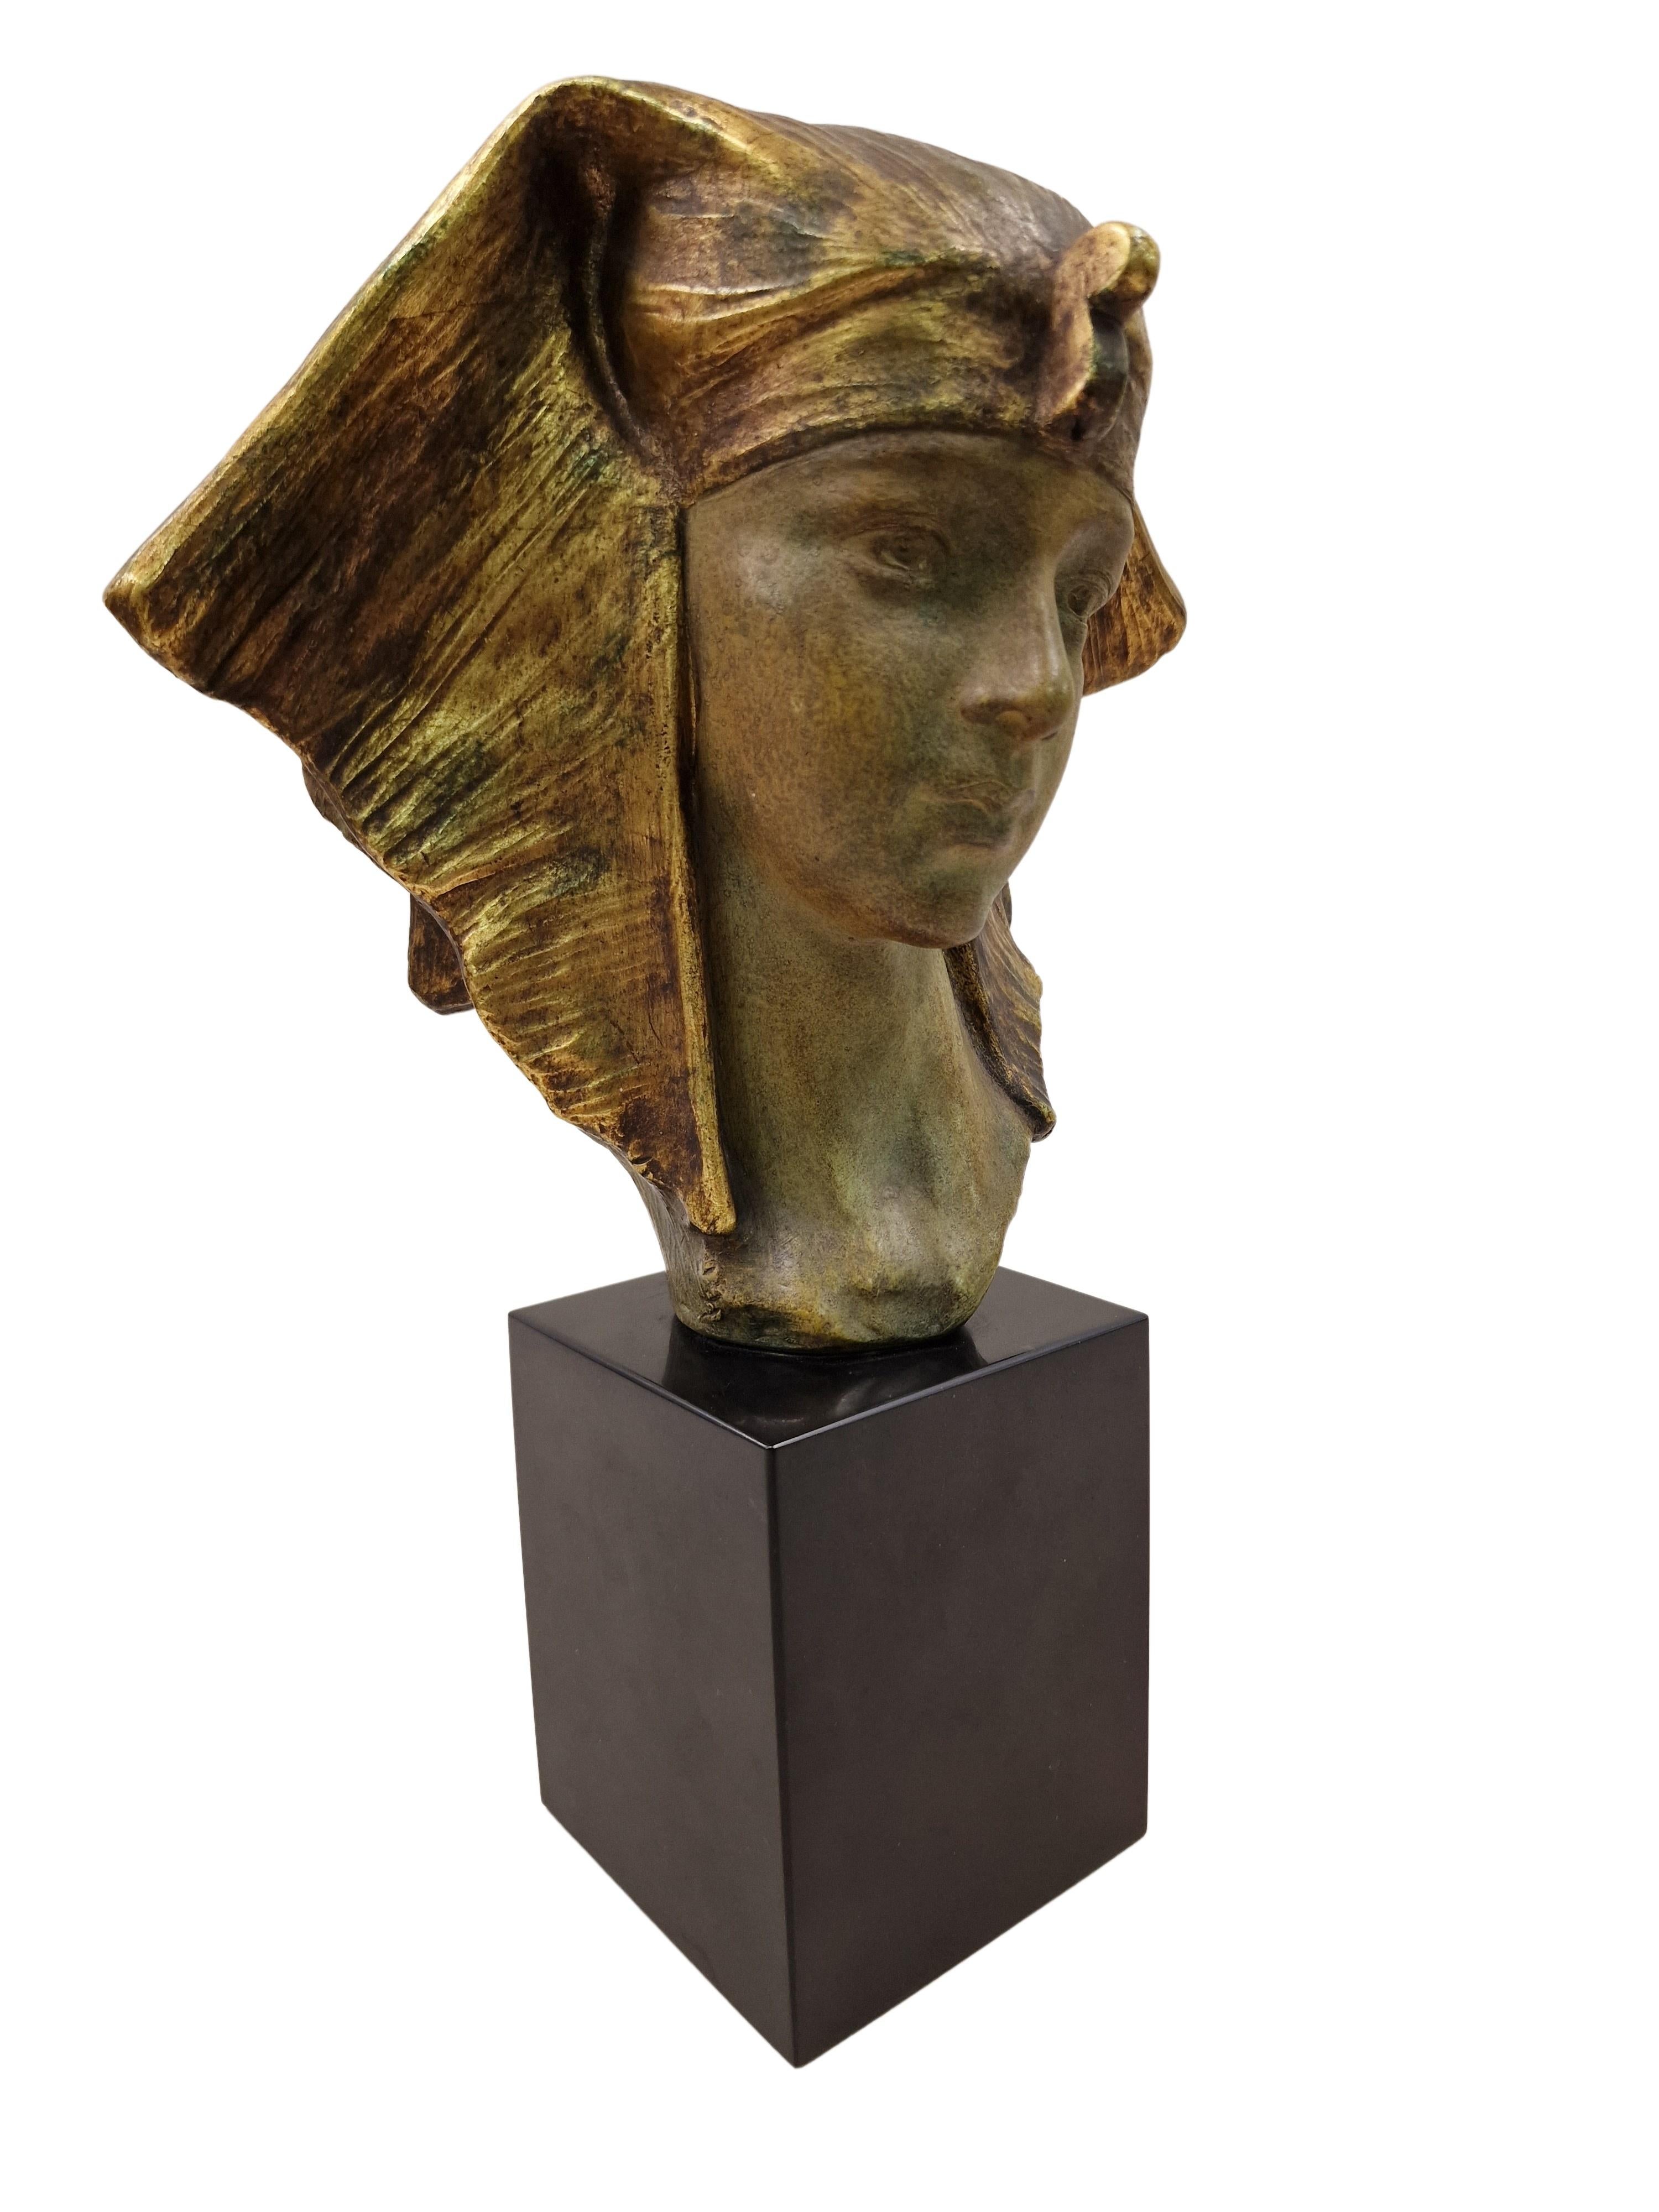 Rare particularly beautiful depiction of the Egyptian Queen Cleopatra. Created by Gustave van Vaerenbergh under his pseudonym G. Carli from the Art Deco period. This terracotta was polychromed by hand, which beautifully emphasizes the fine facial